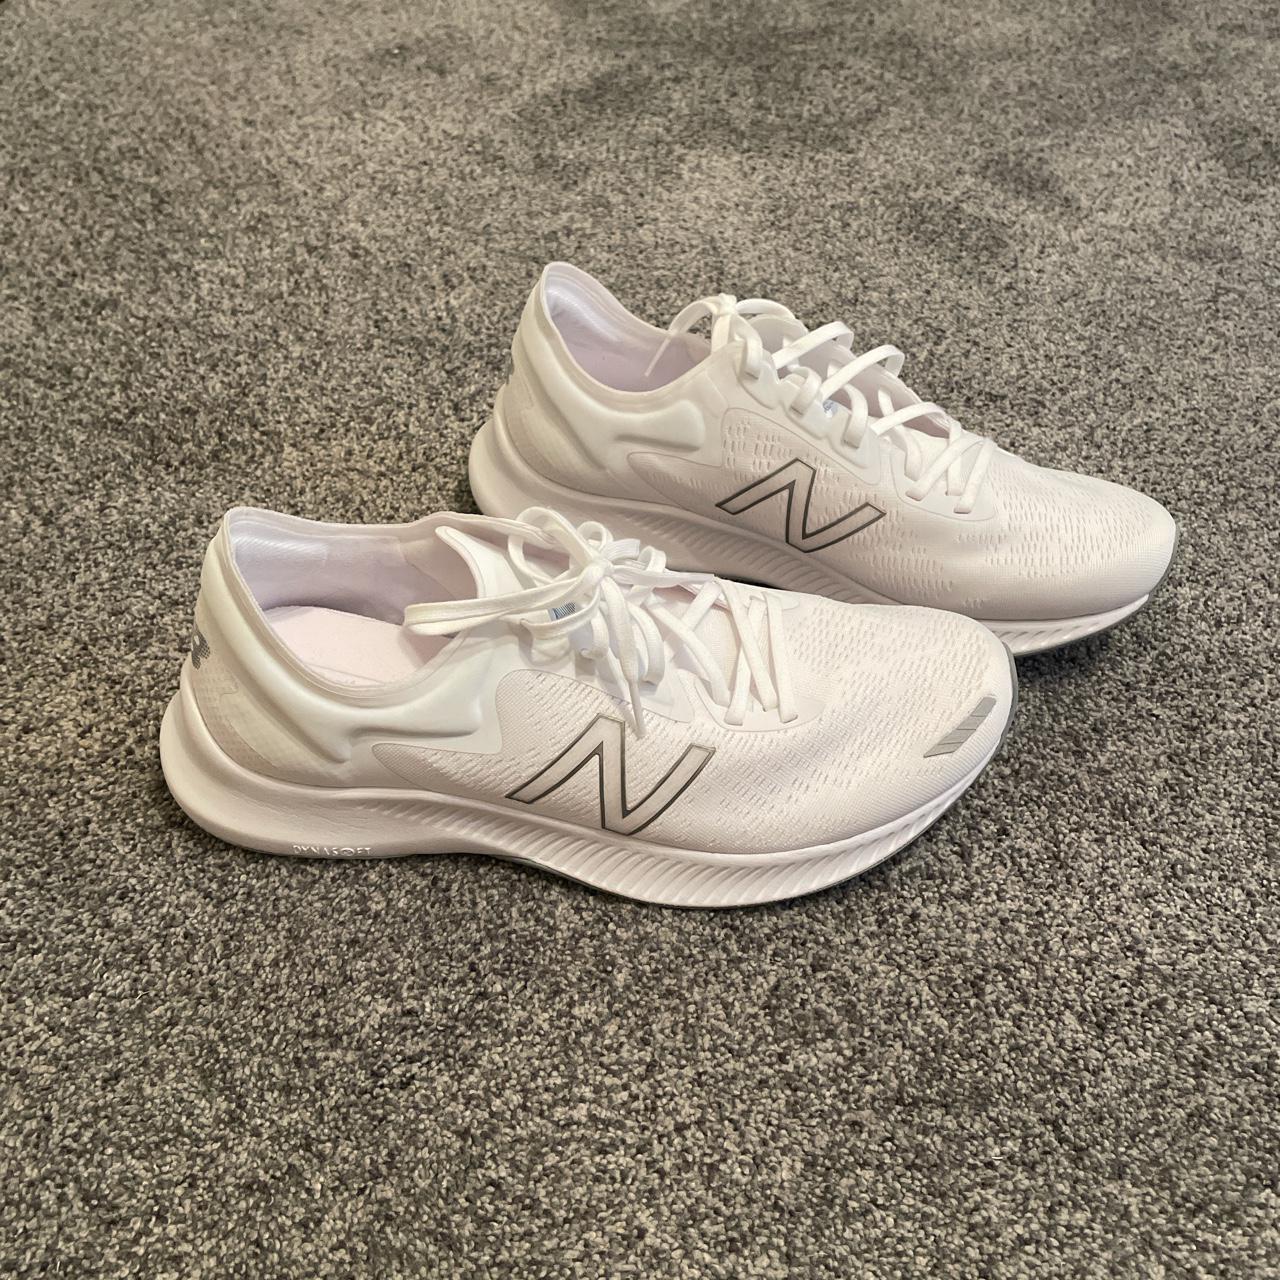 New Balance Men's White and Grey Trainers